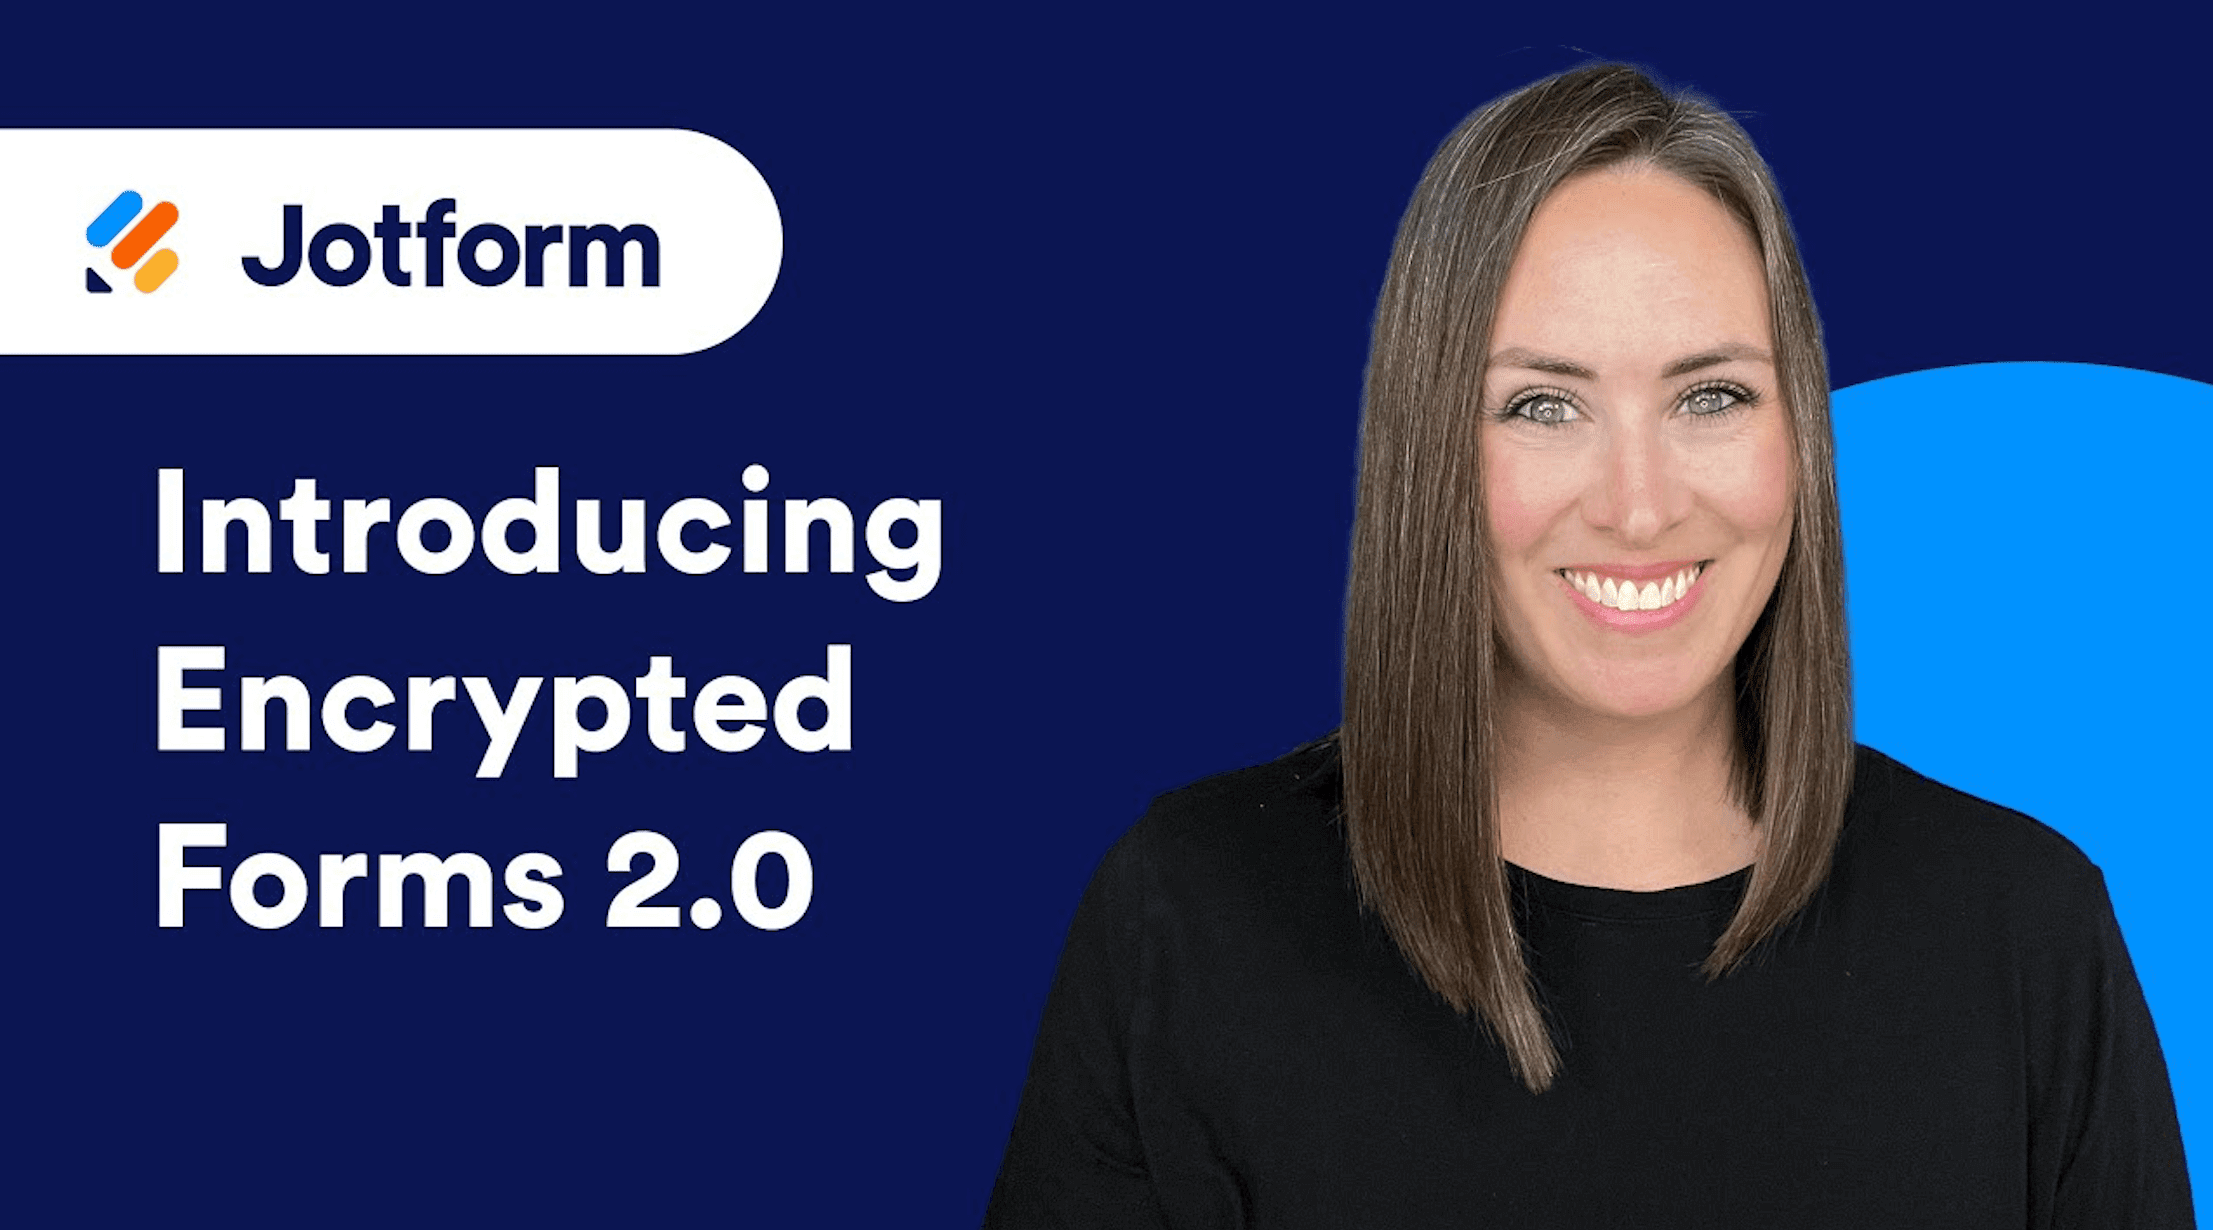 Introducing Encrypted Forms 2.0